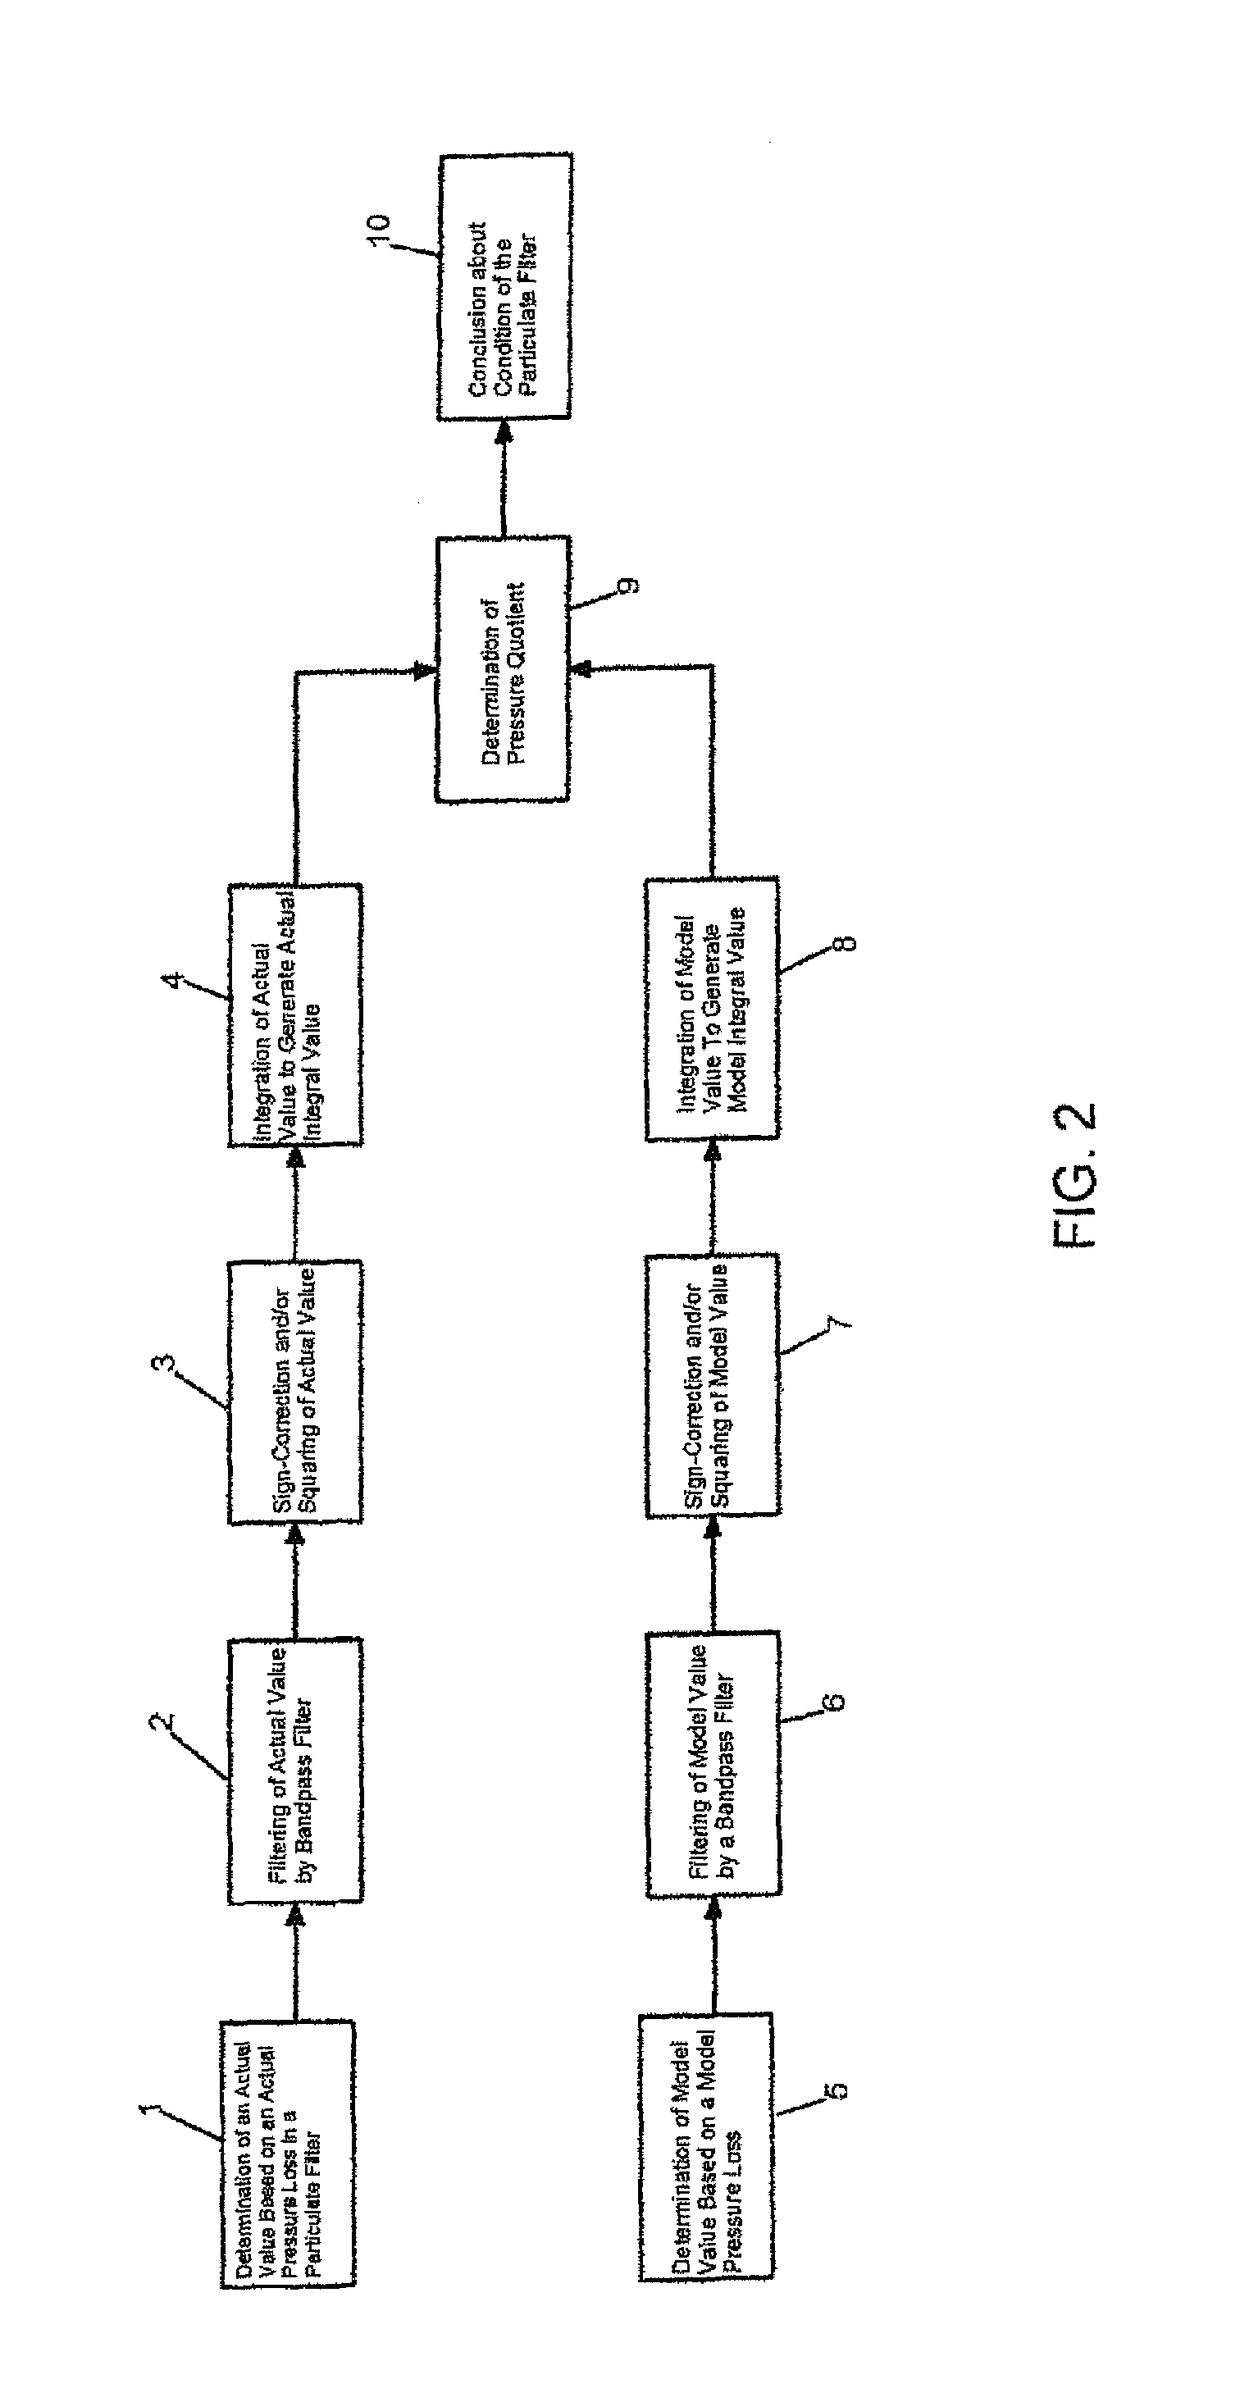 Method of operating an exhaust emission control device, and corresponding exhaust emission control device